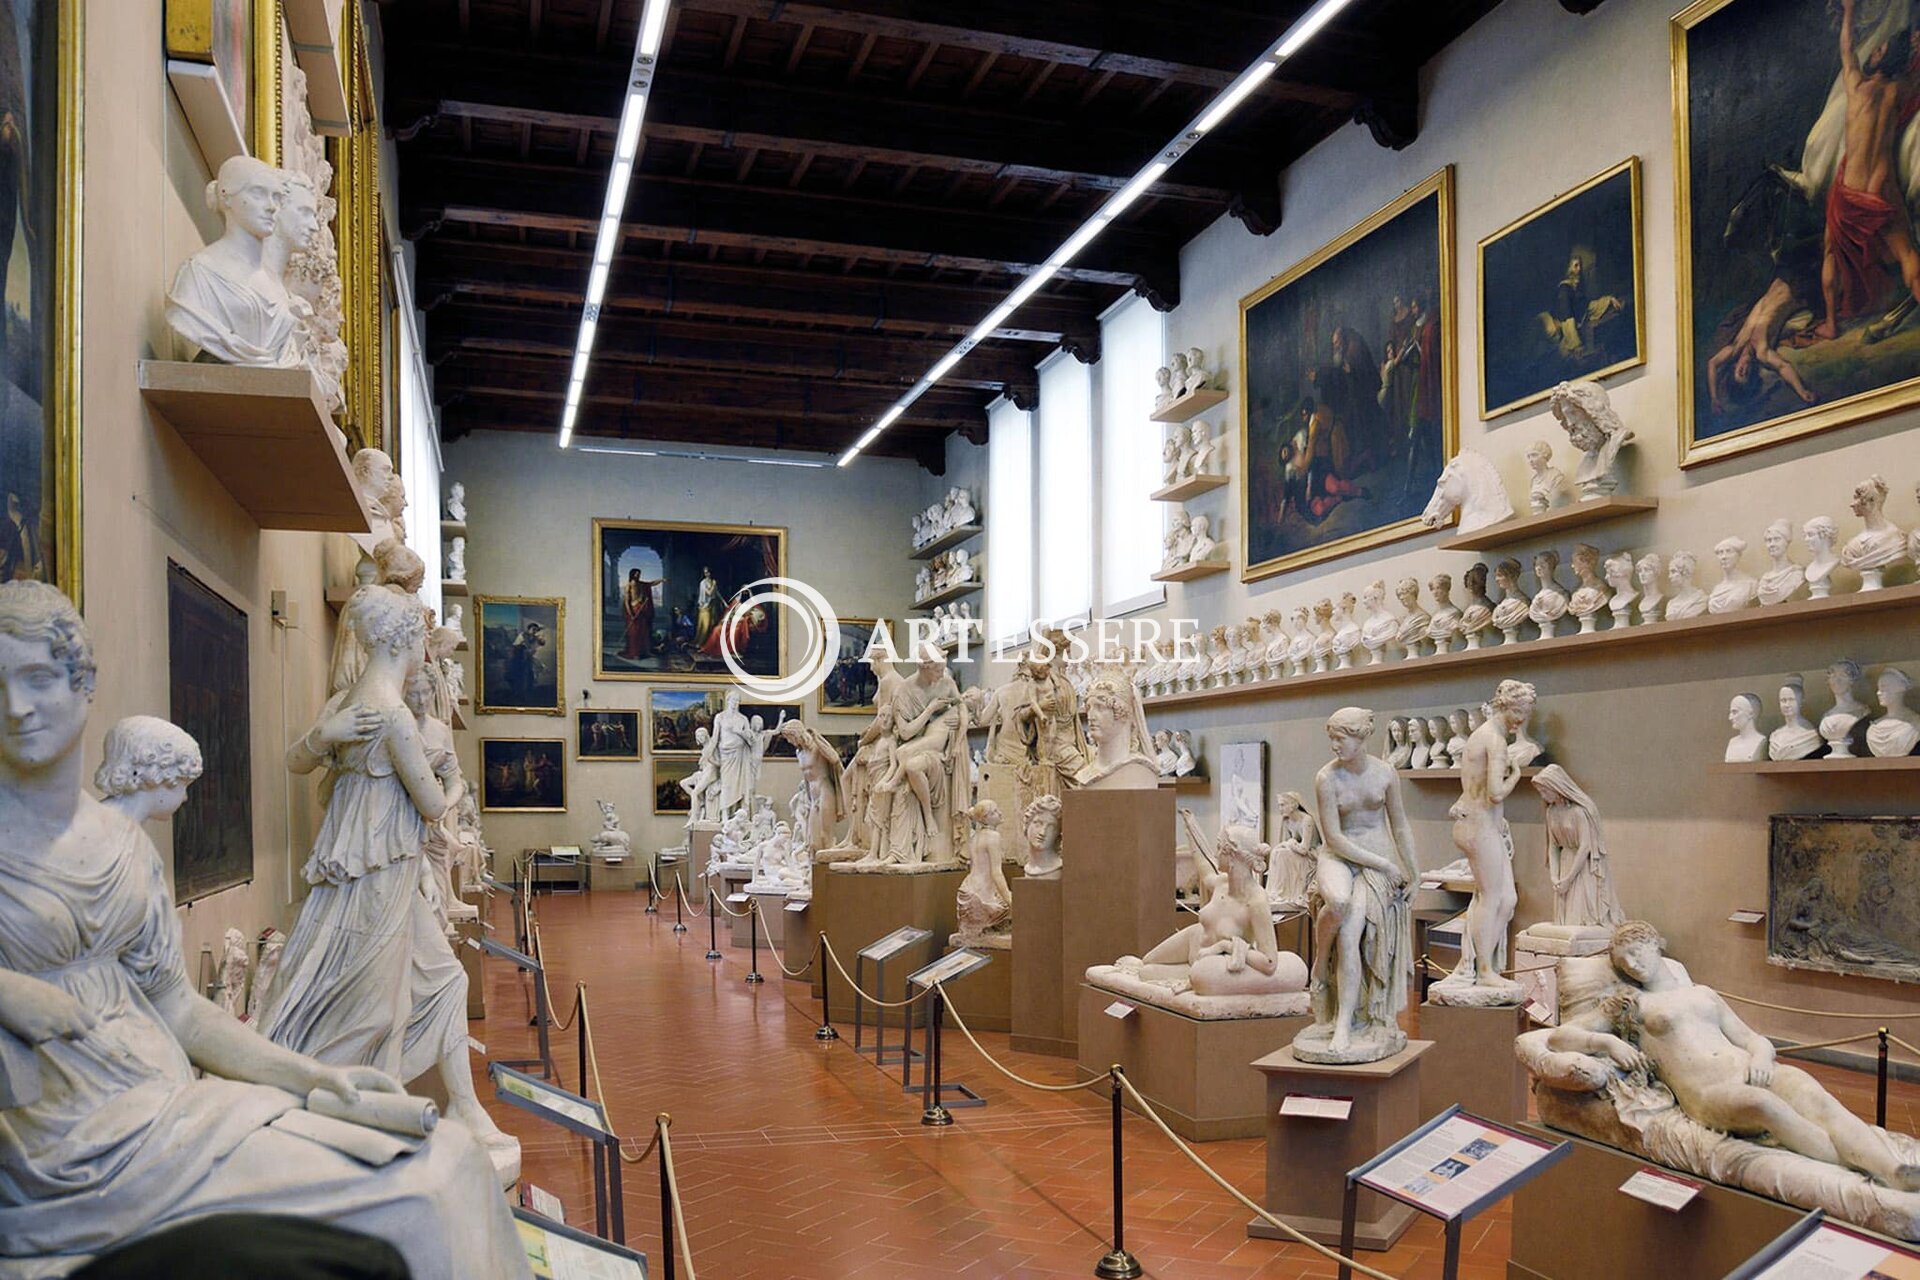 Academy Gallery in Florence